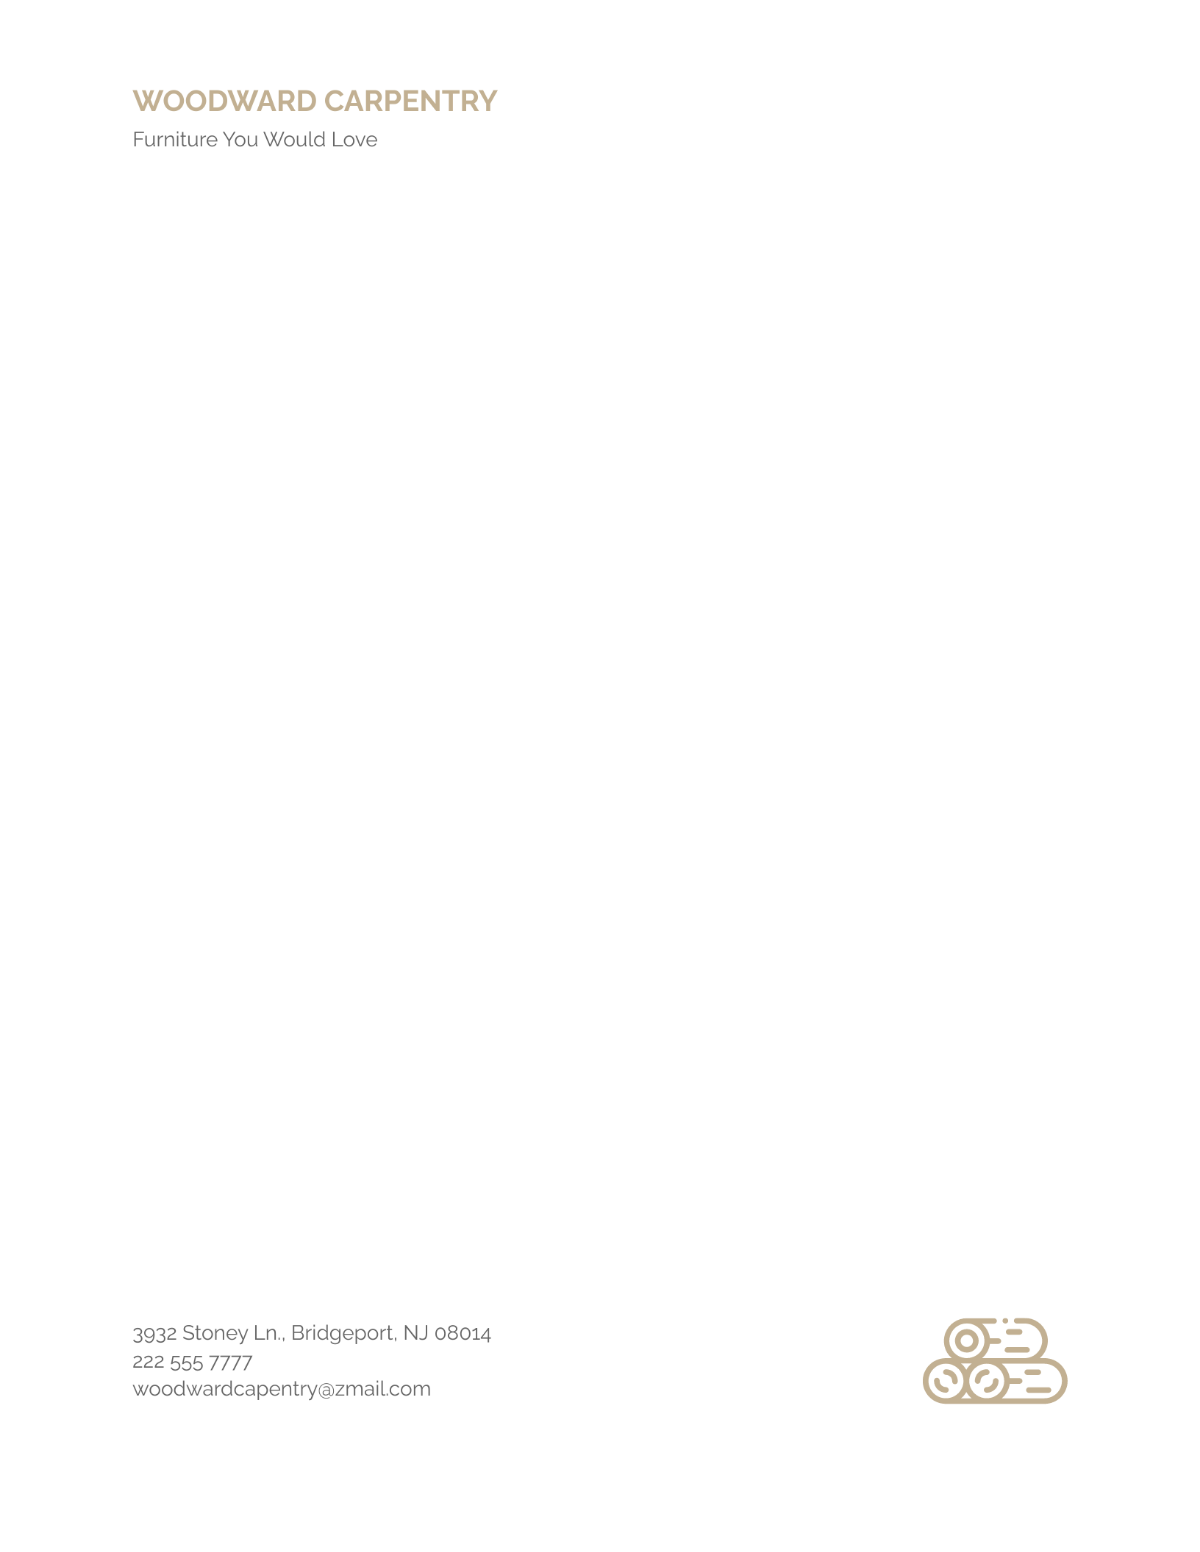 Carpentry & Woodworking Letterhead Template